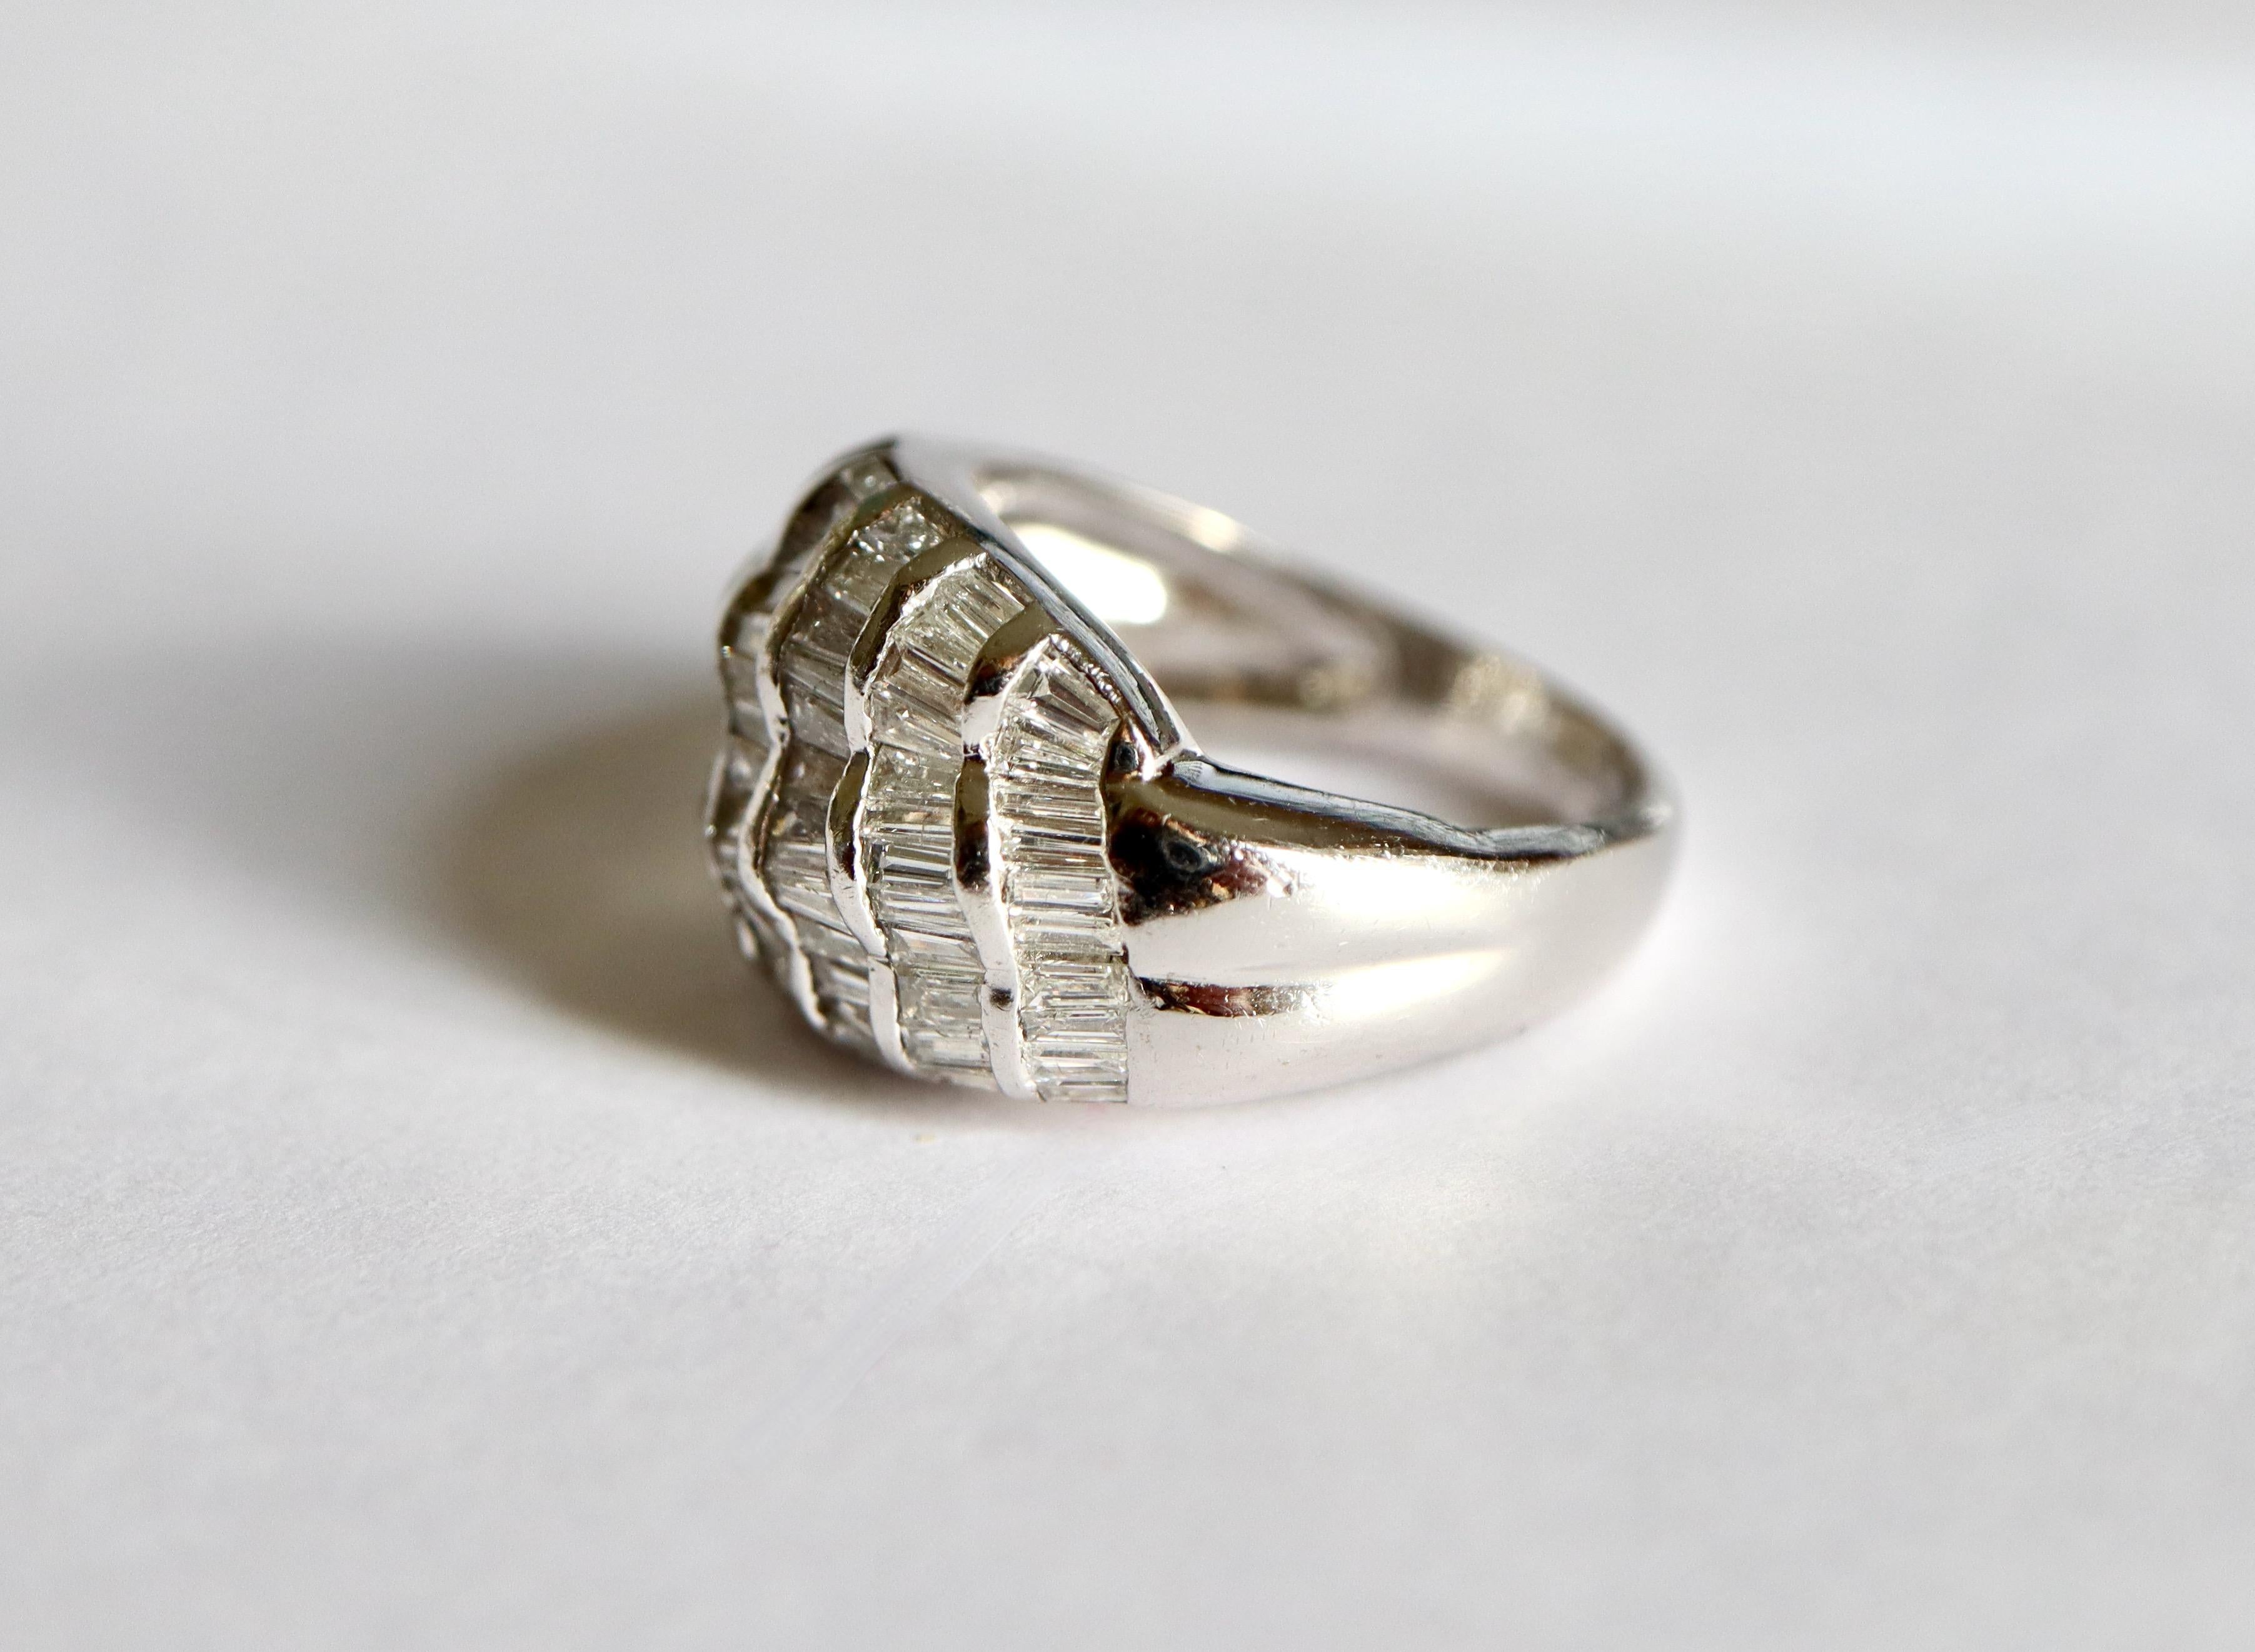 Ring in 18 carat white gold with a wave pattern all paved with diamonds. 7 rows of baguette diamonds for a total weight of 1.3 to 1.5 carats.
Diameter: 16.5 mm FR Size 52 US Size : 6
French Hallmark : Eagle head hallmark for 18 carat gold 
Gross